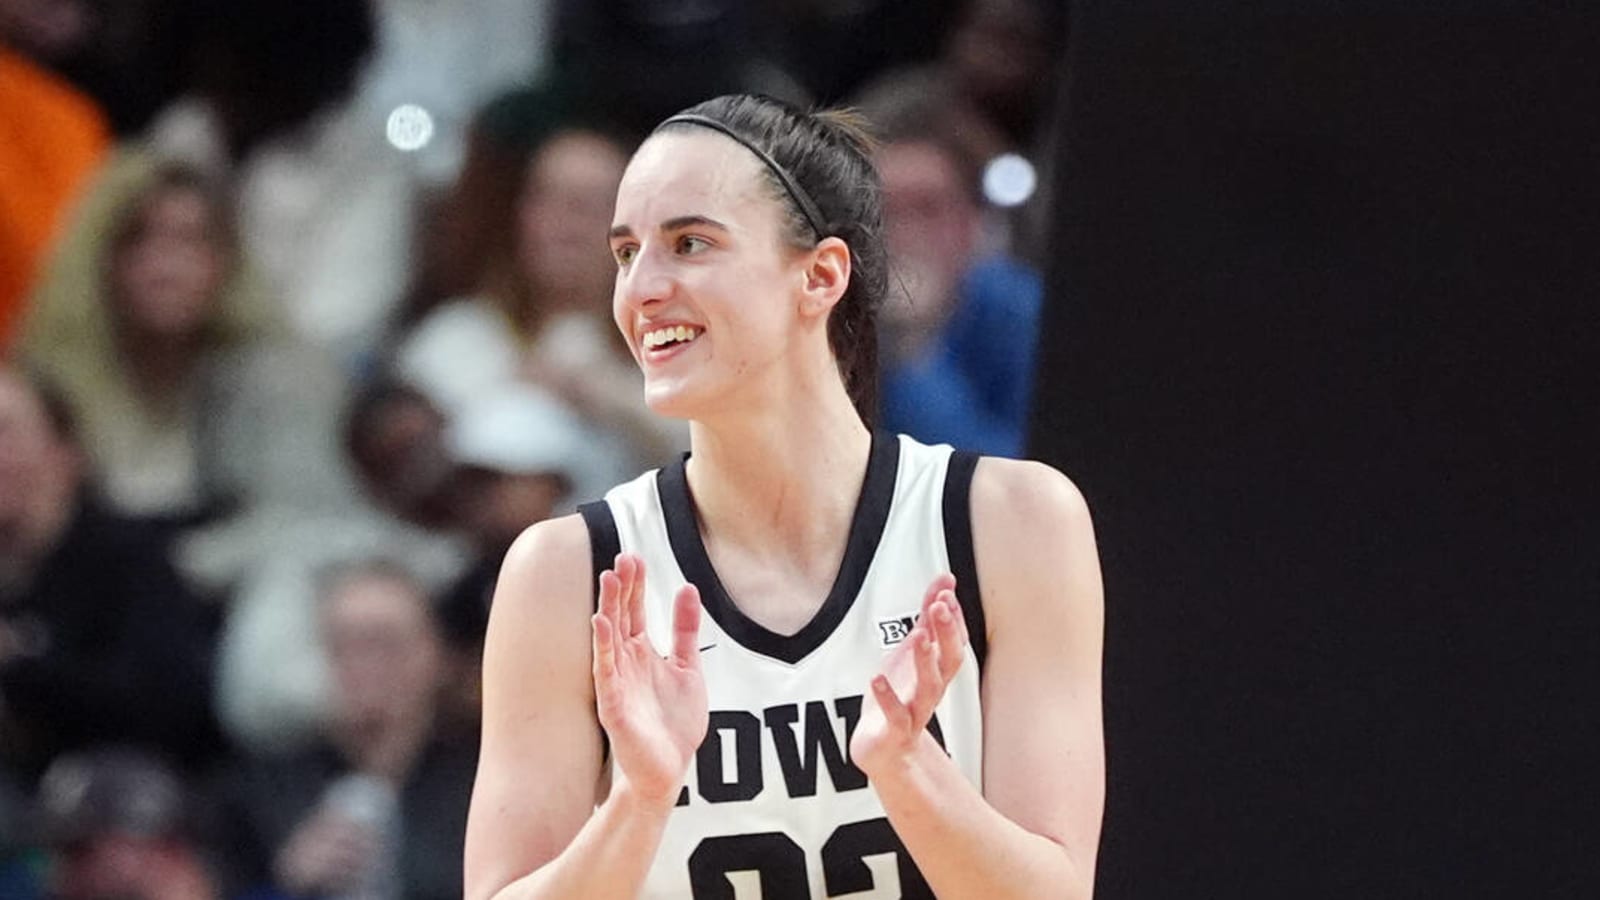 Sports world reacts to Caitlin Clark's heroics in Elite Eight